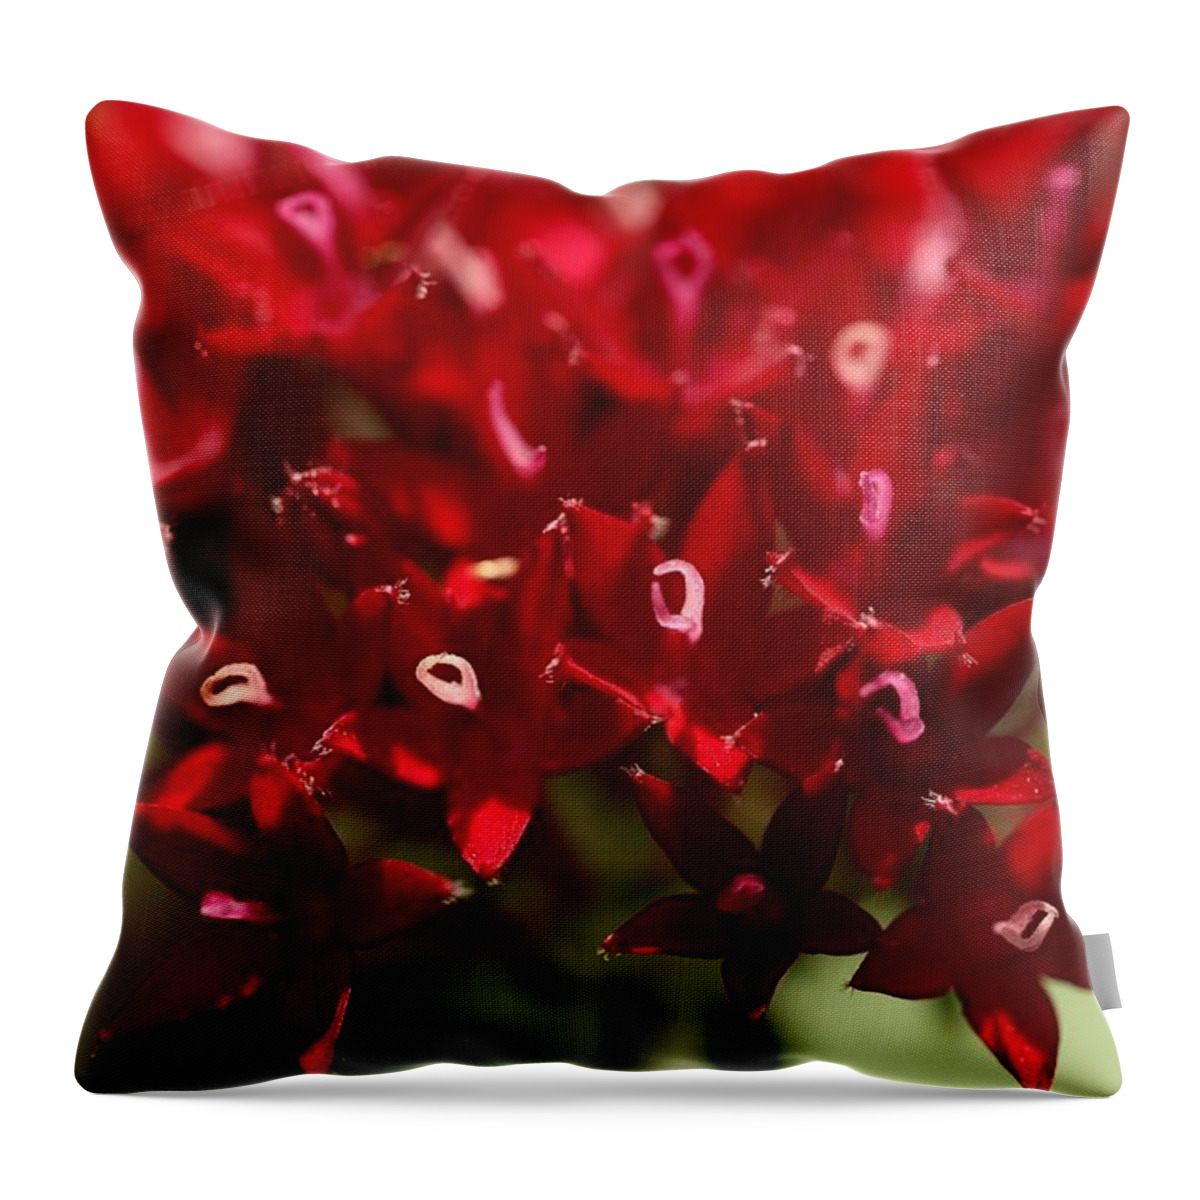 Penta Flower Throw Pillow featuring the photograph Red Penta Flowers by Mingming Jiang